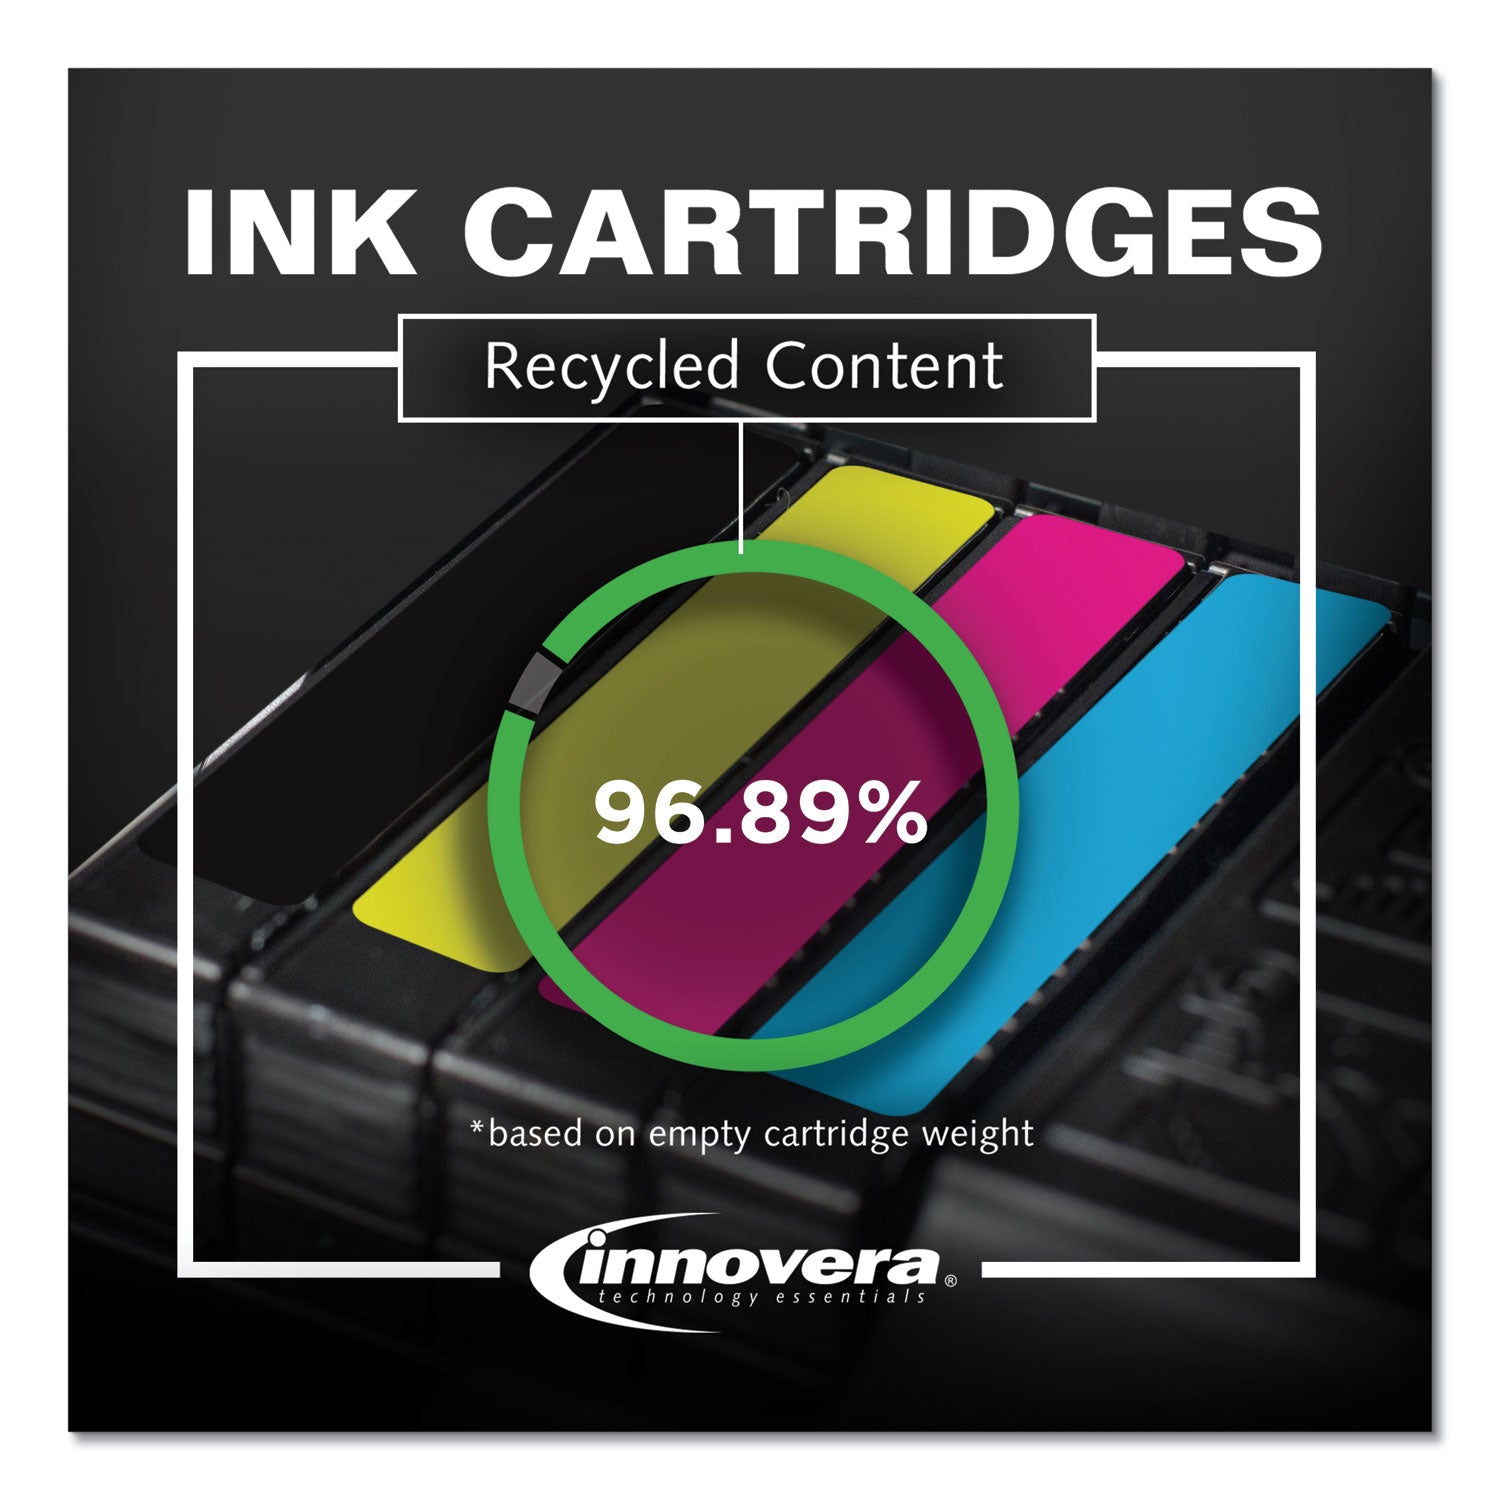 Remanufactured Tri-Color High-Yield Ink, Replacement for Series 1 (T0530), 275 Page-Yield - 